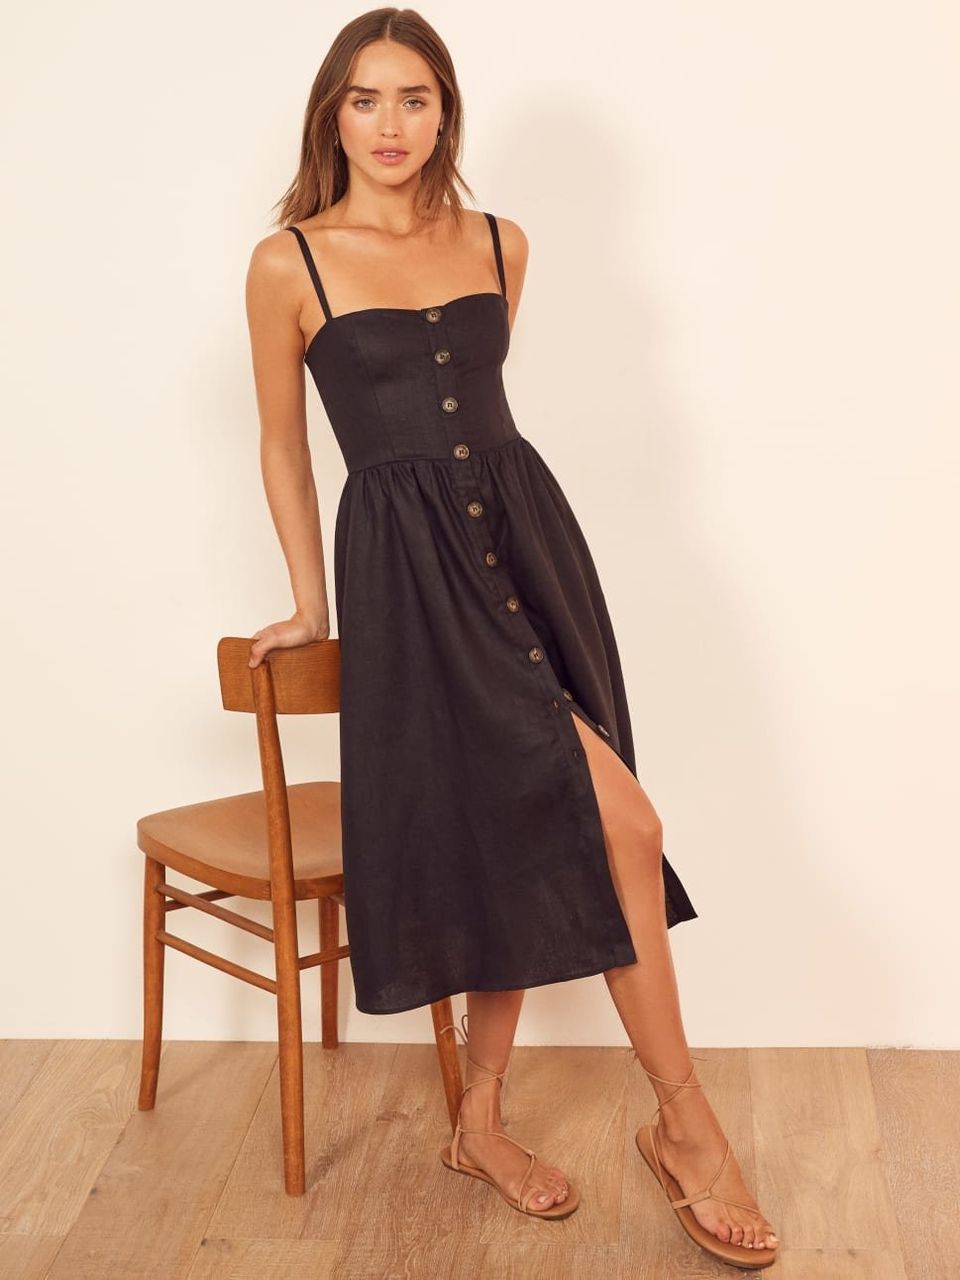 20 Black Summer Dresses That Are Perfect For Board Room To Boardwalk ...